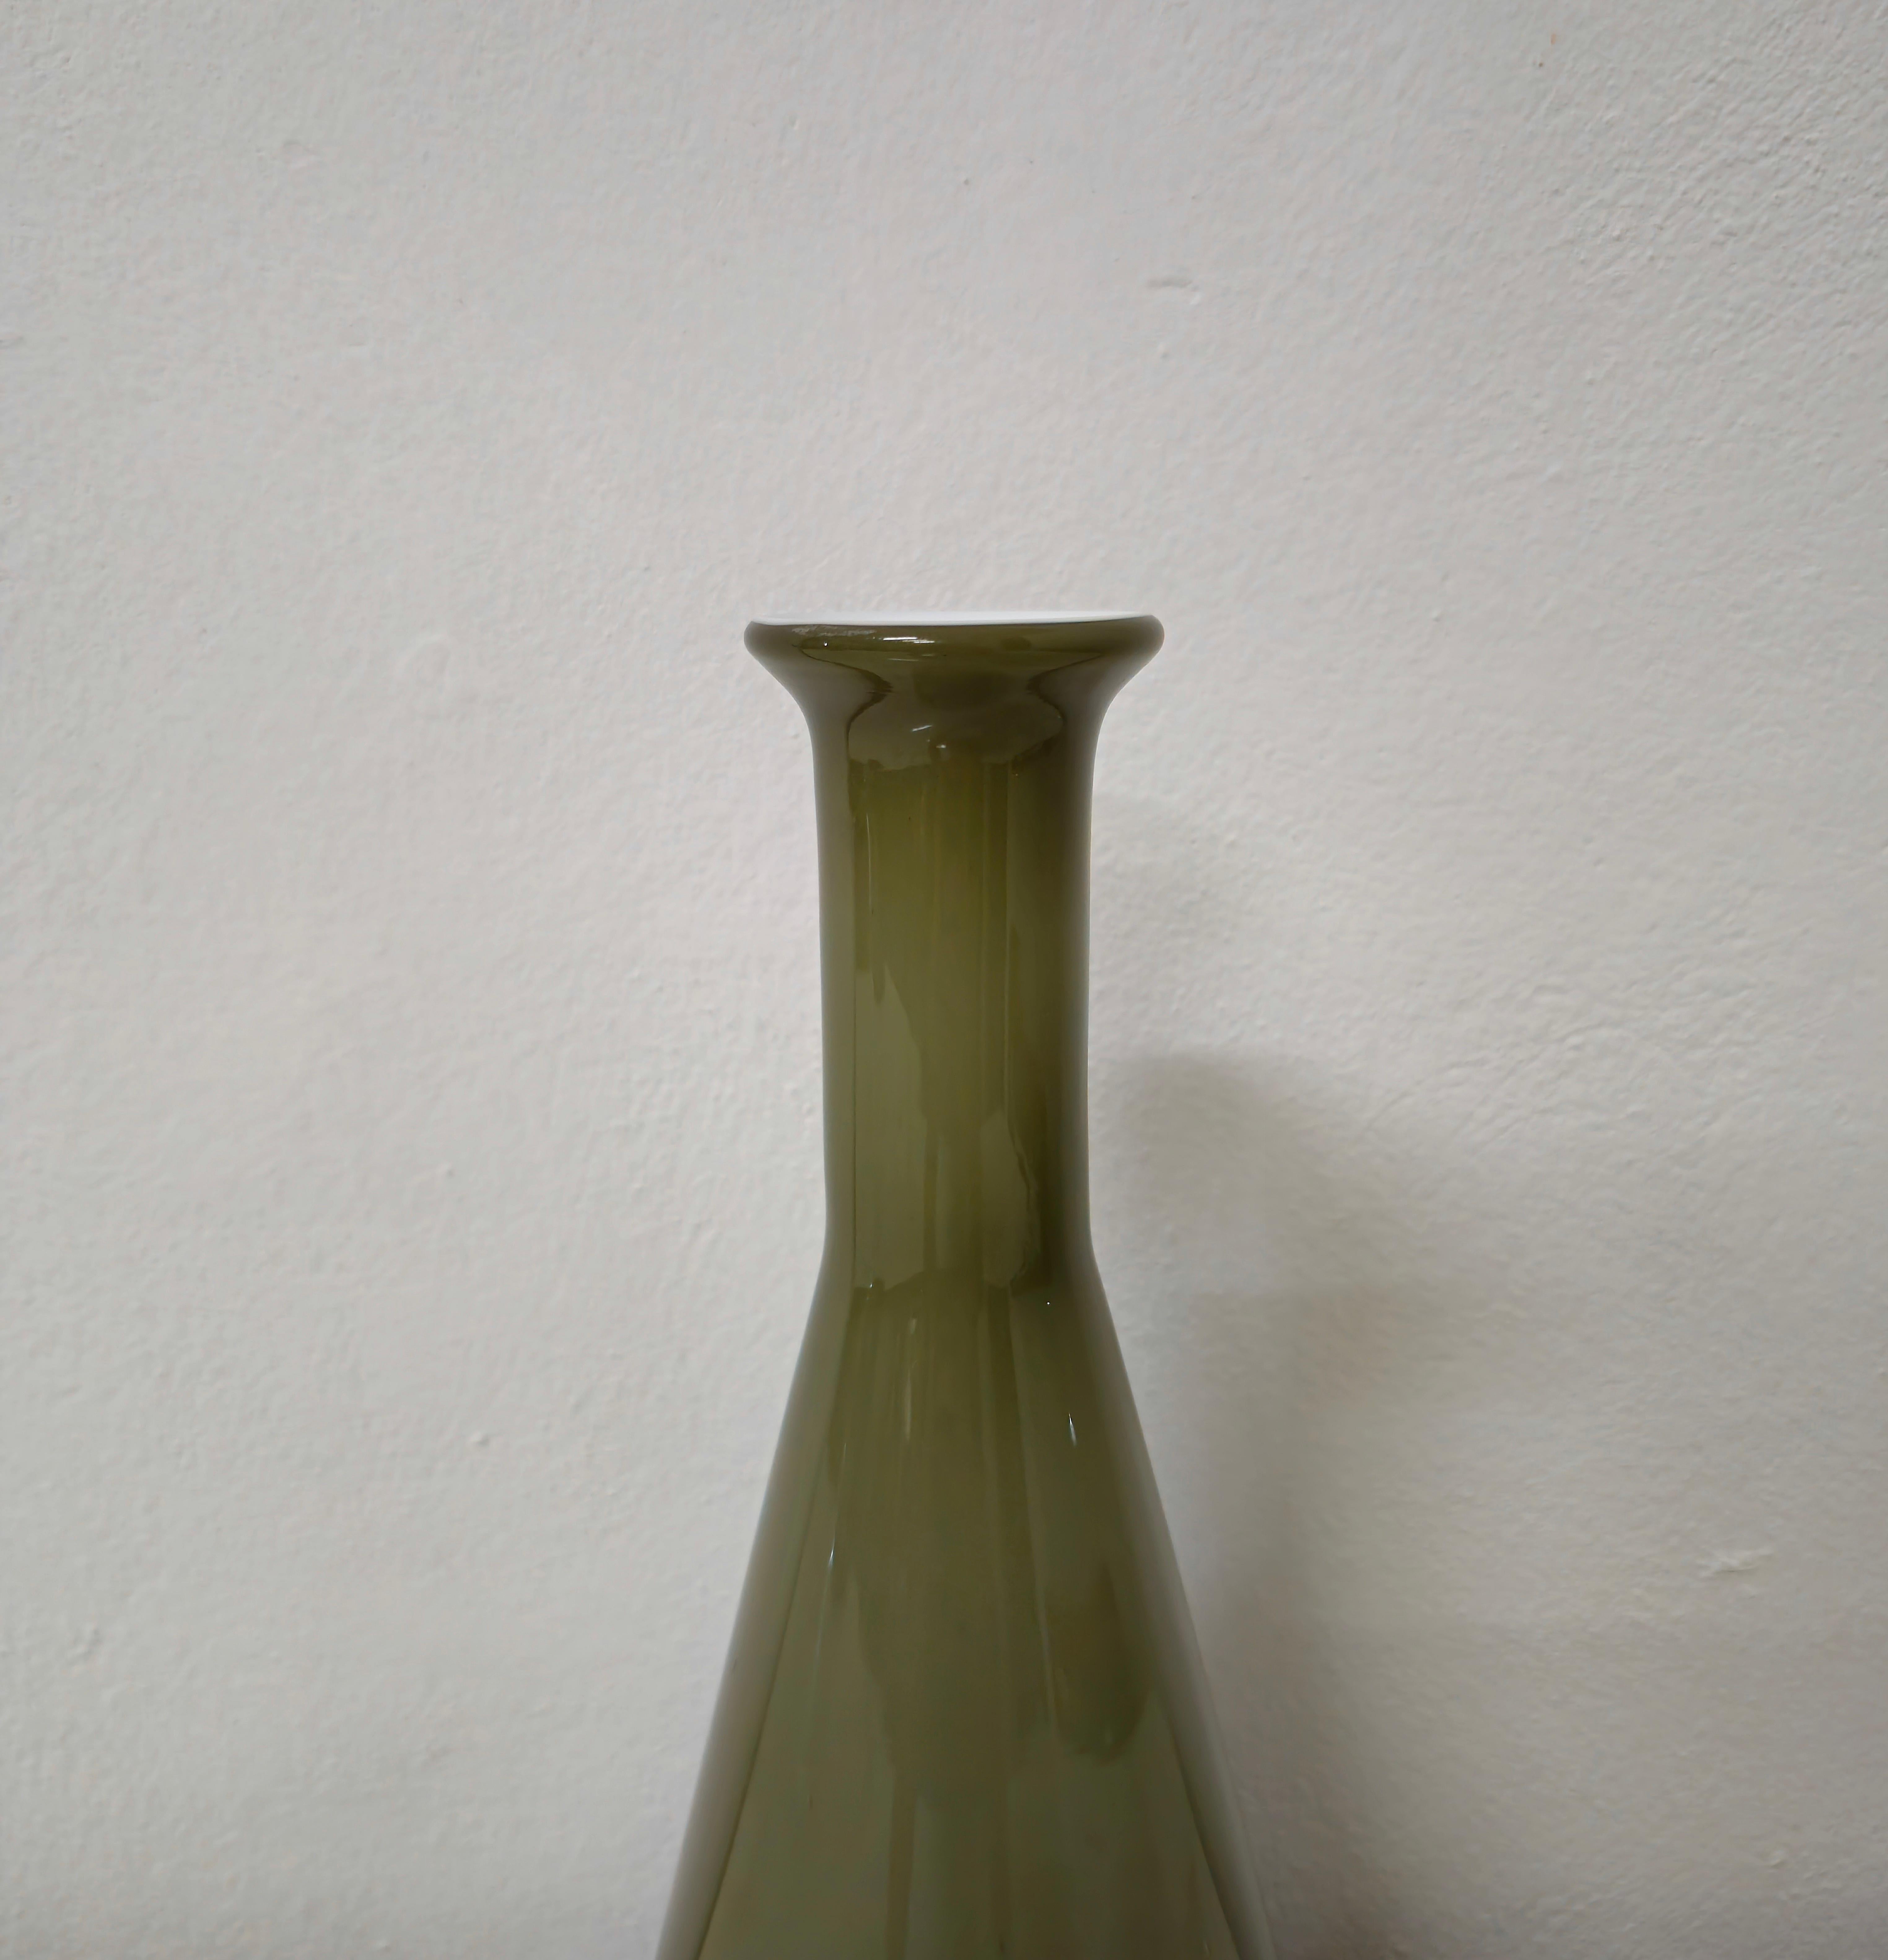 Vase Decorative Object Murano Glass Green Midcentury Modern Italian Design 1960s In Good Condition For Sale In Palermo, IT